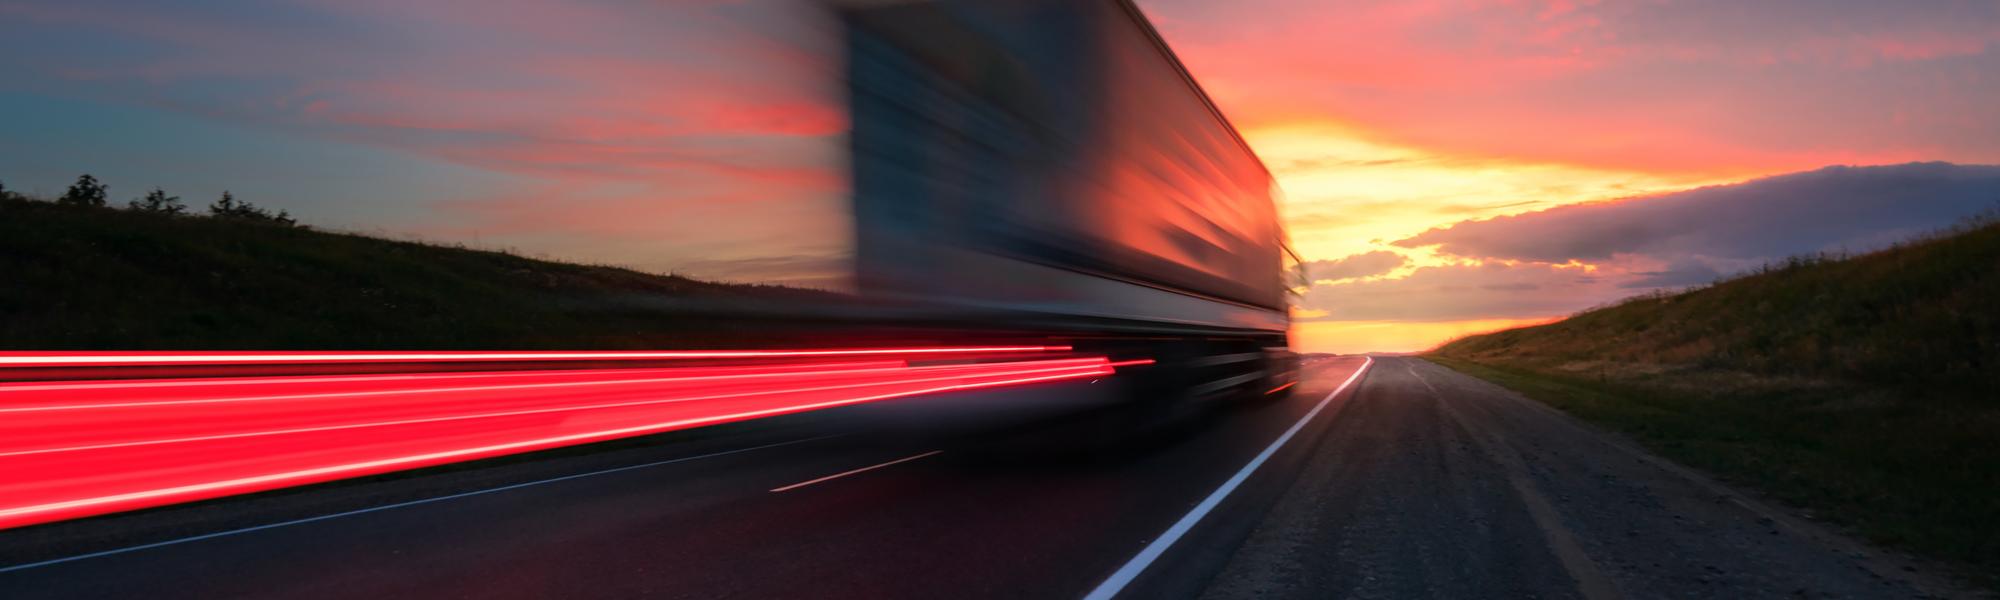 European Road Freight Rate Benchmark Q4 2021: European road freight rates index up 1.1 points in Q4, hitting a new record high